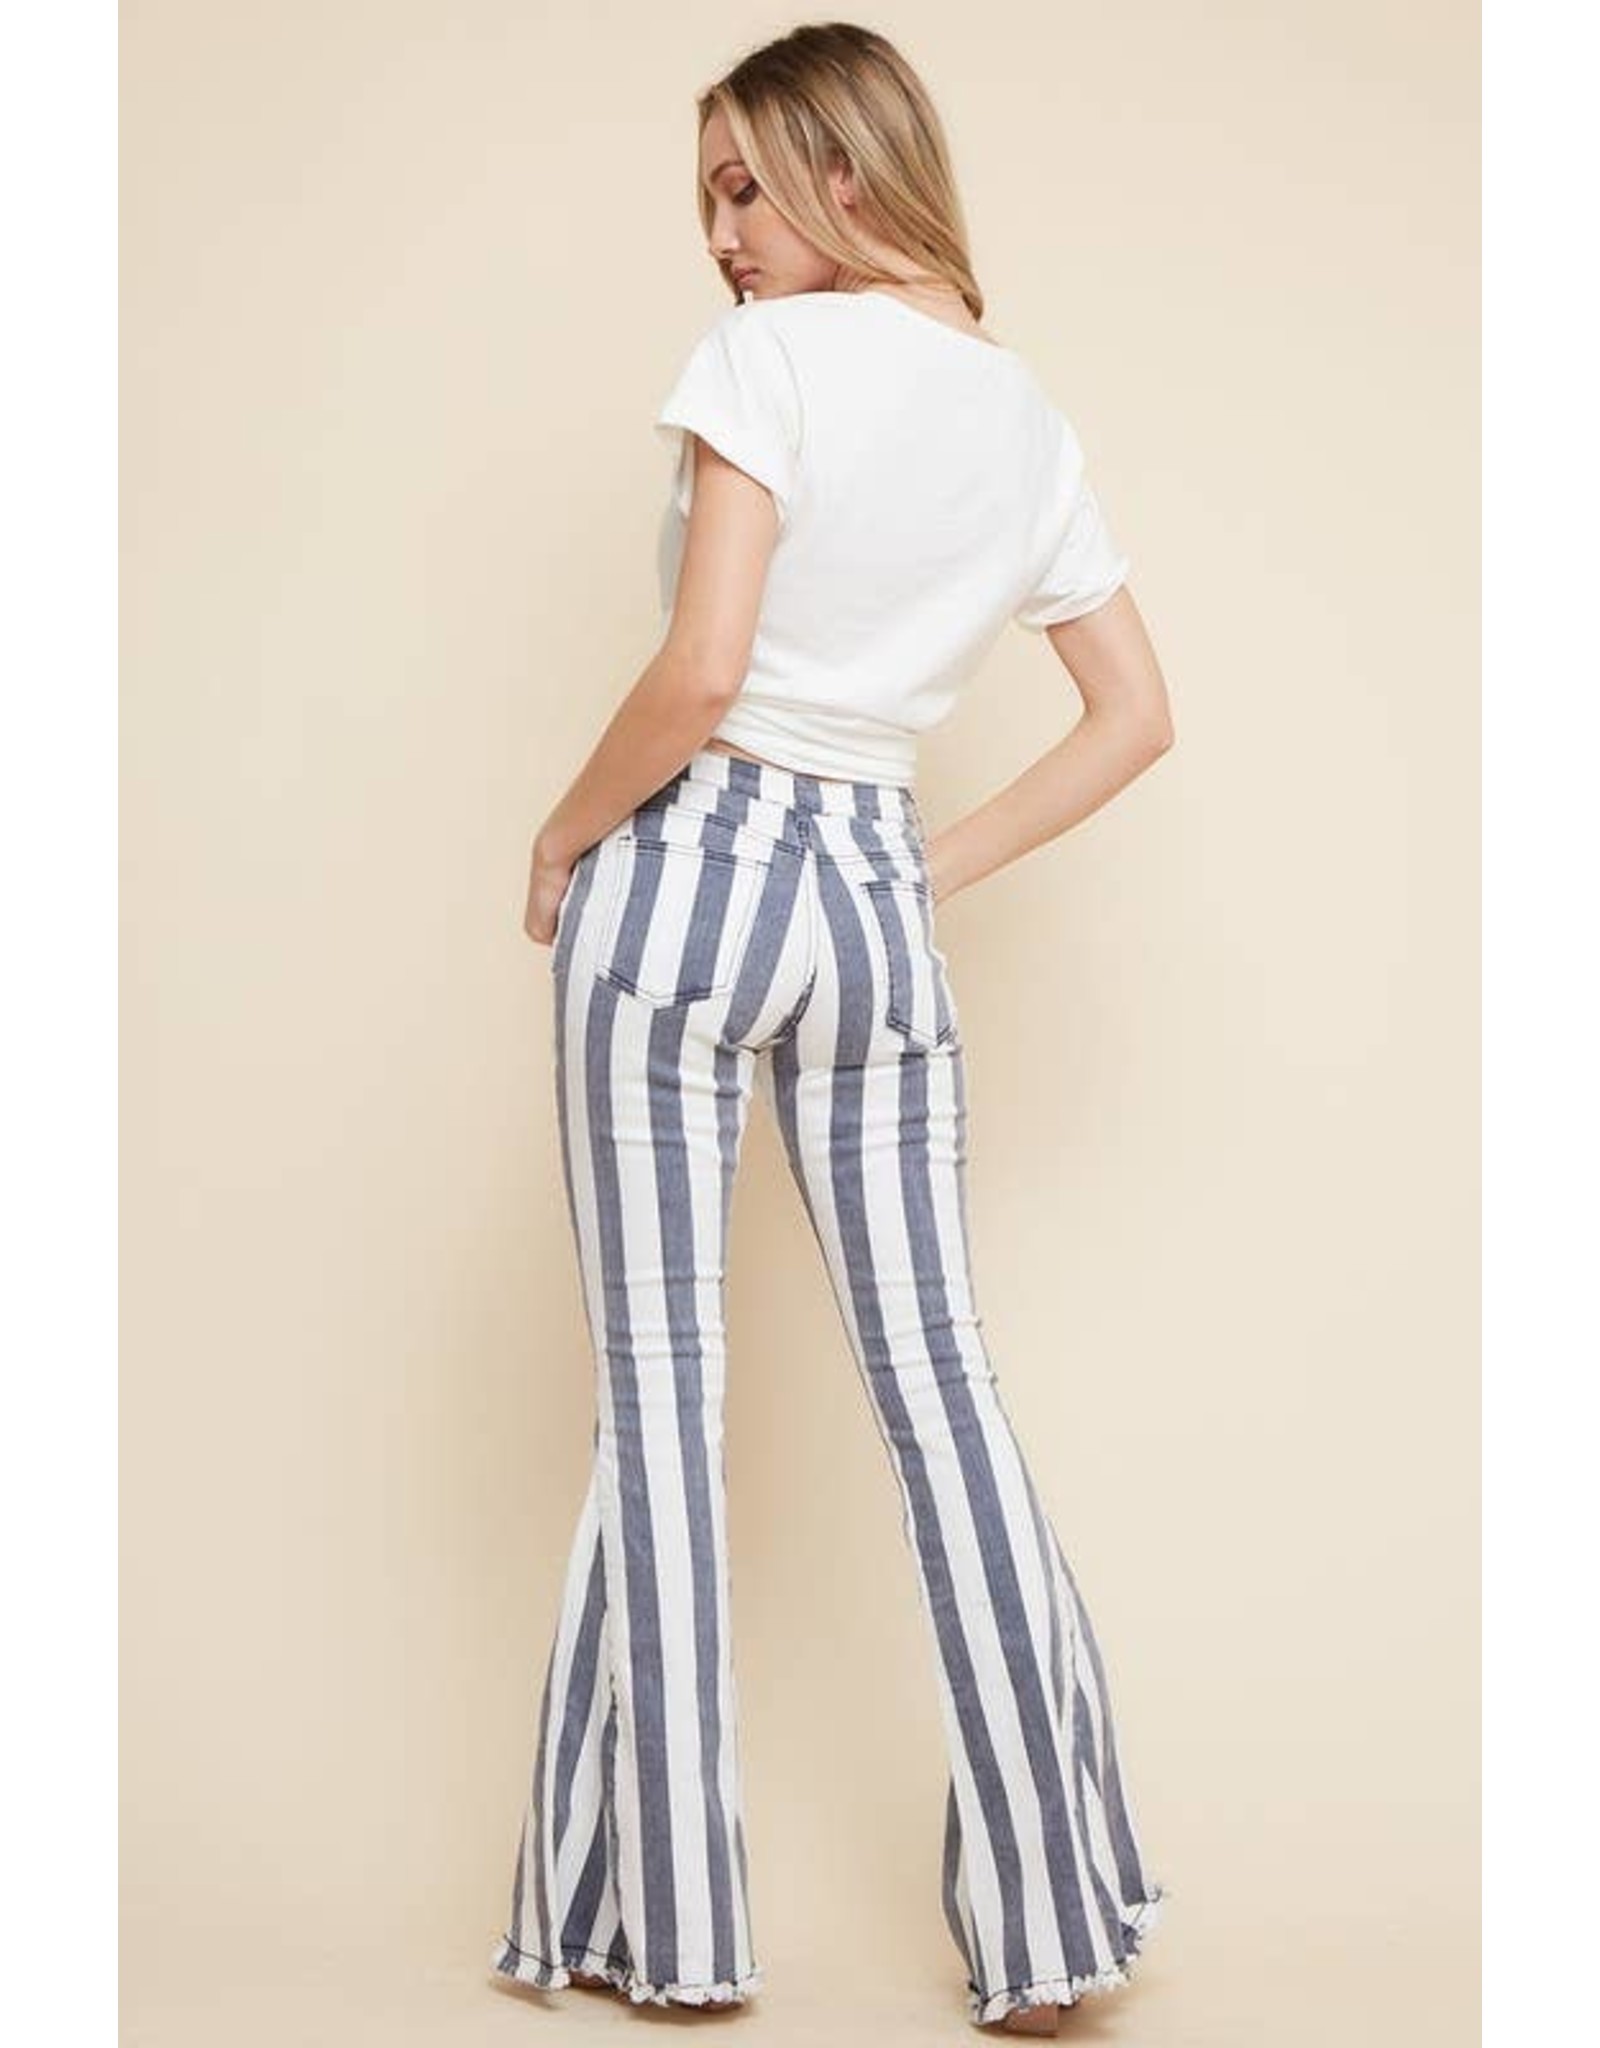 Bestto Striped Flare Bell Bottom Pants